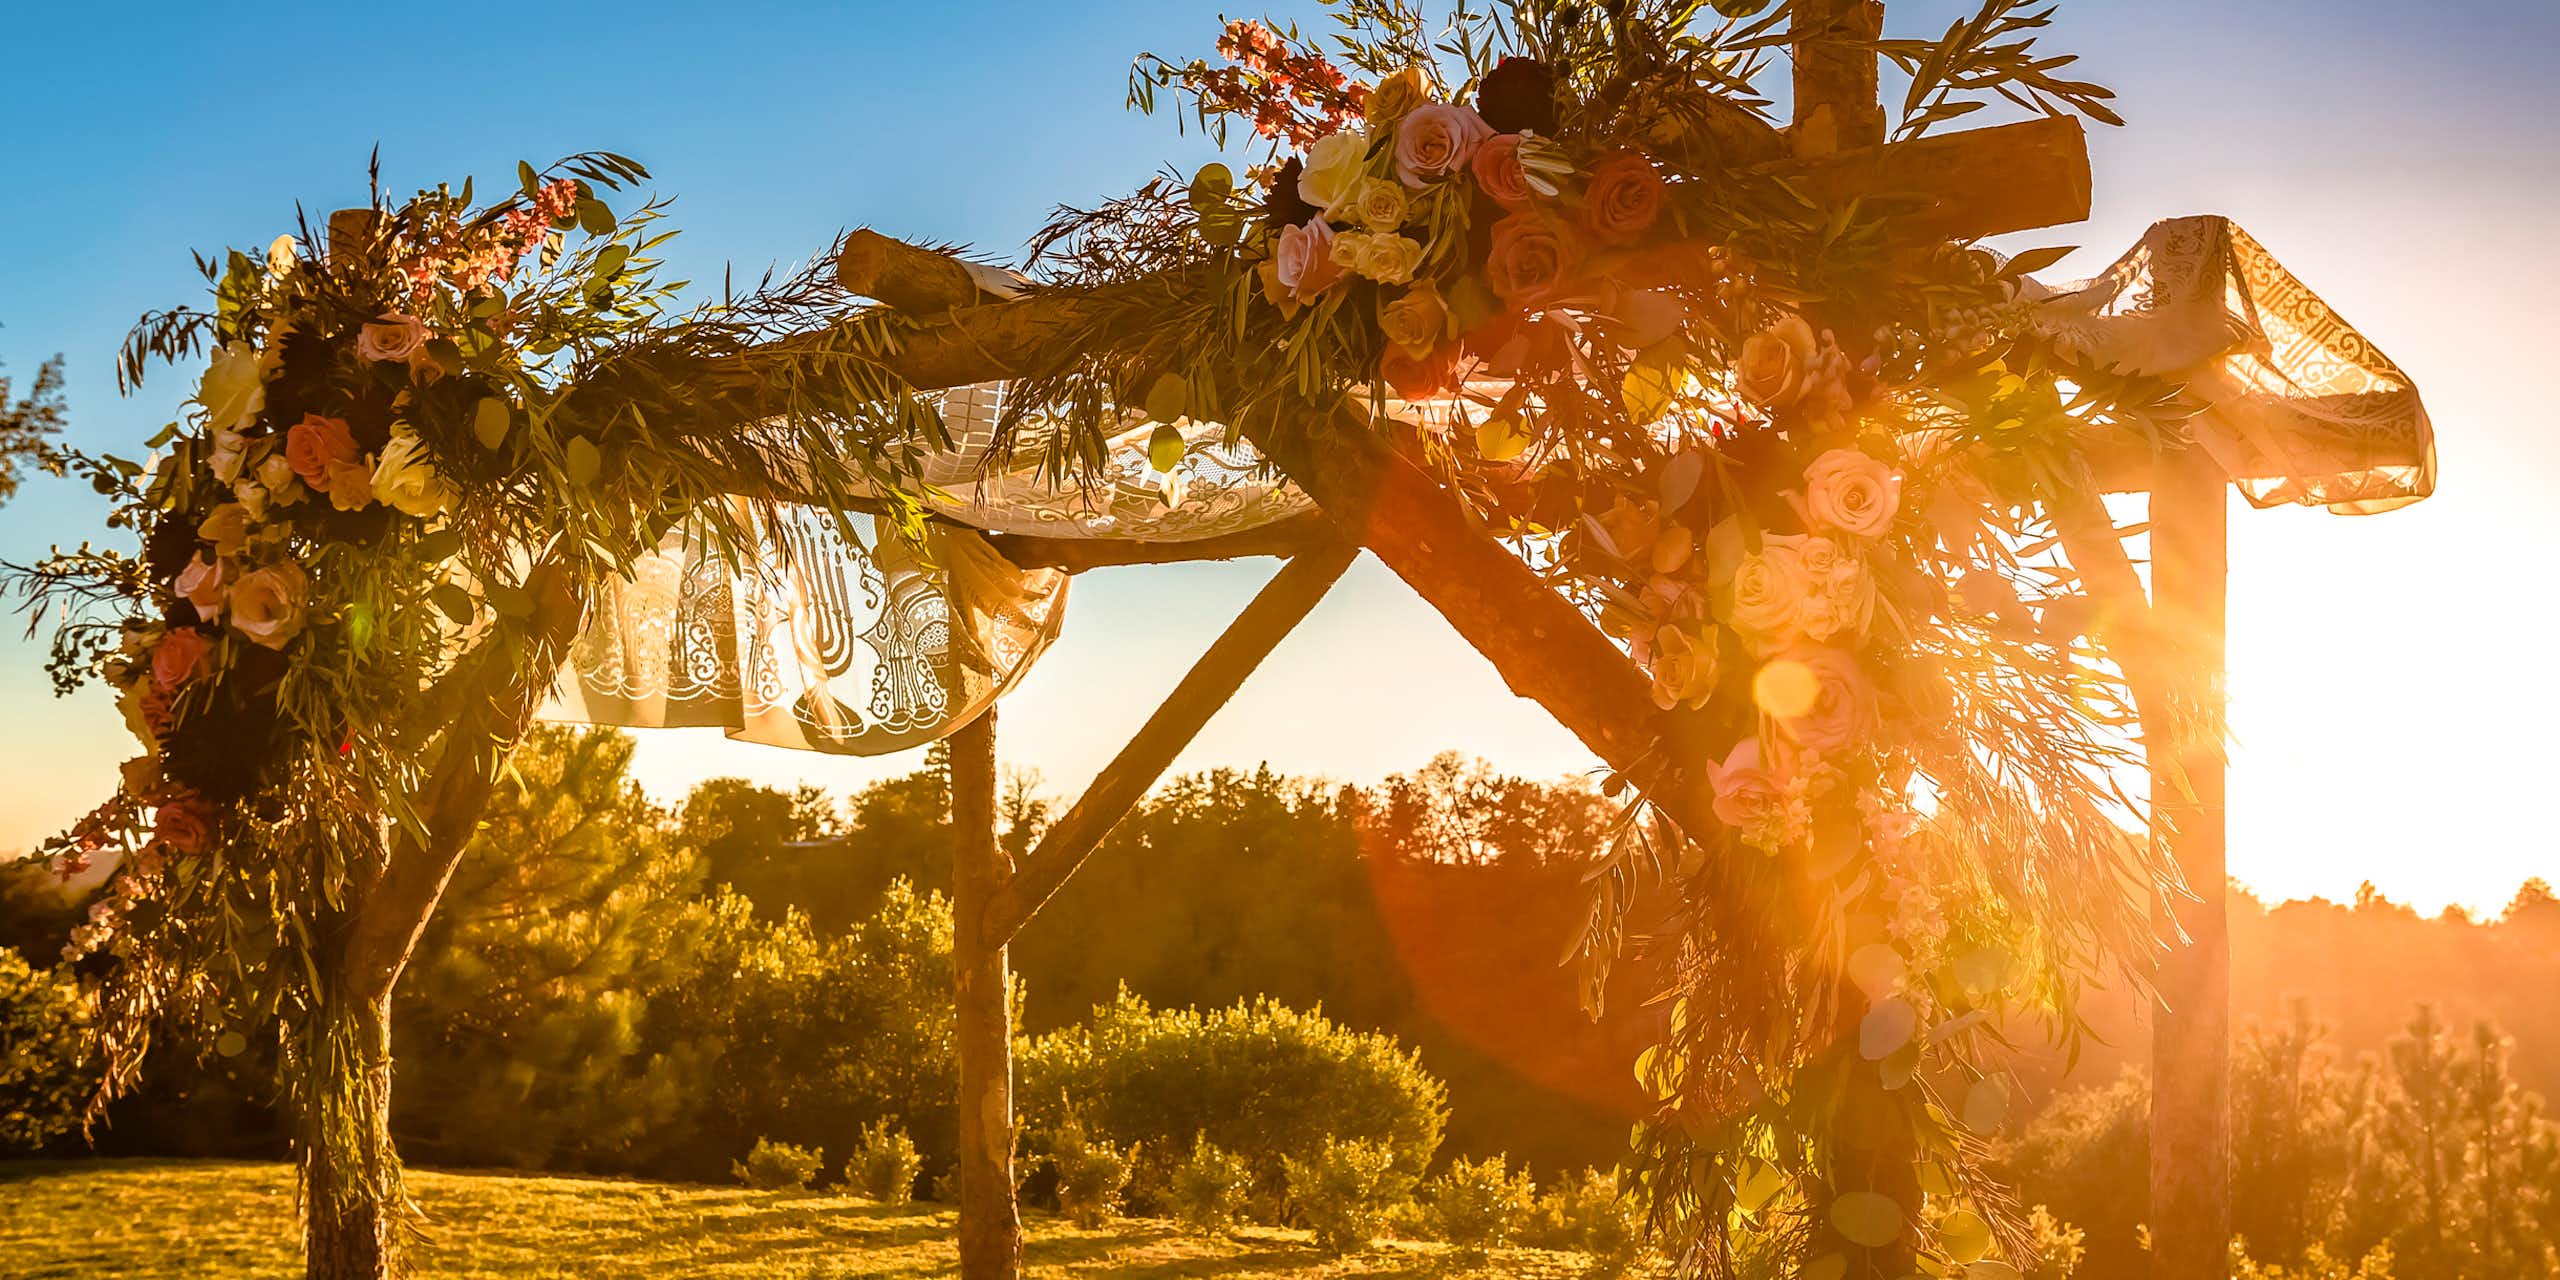 The sun begins to set hazily behind a simple wooden canopy adorned with flowers.